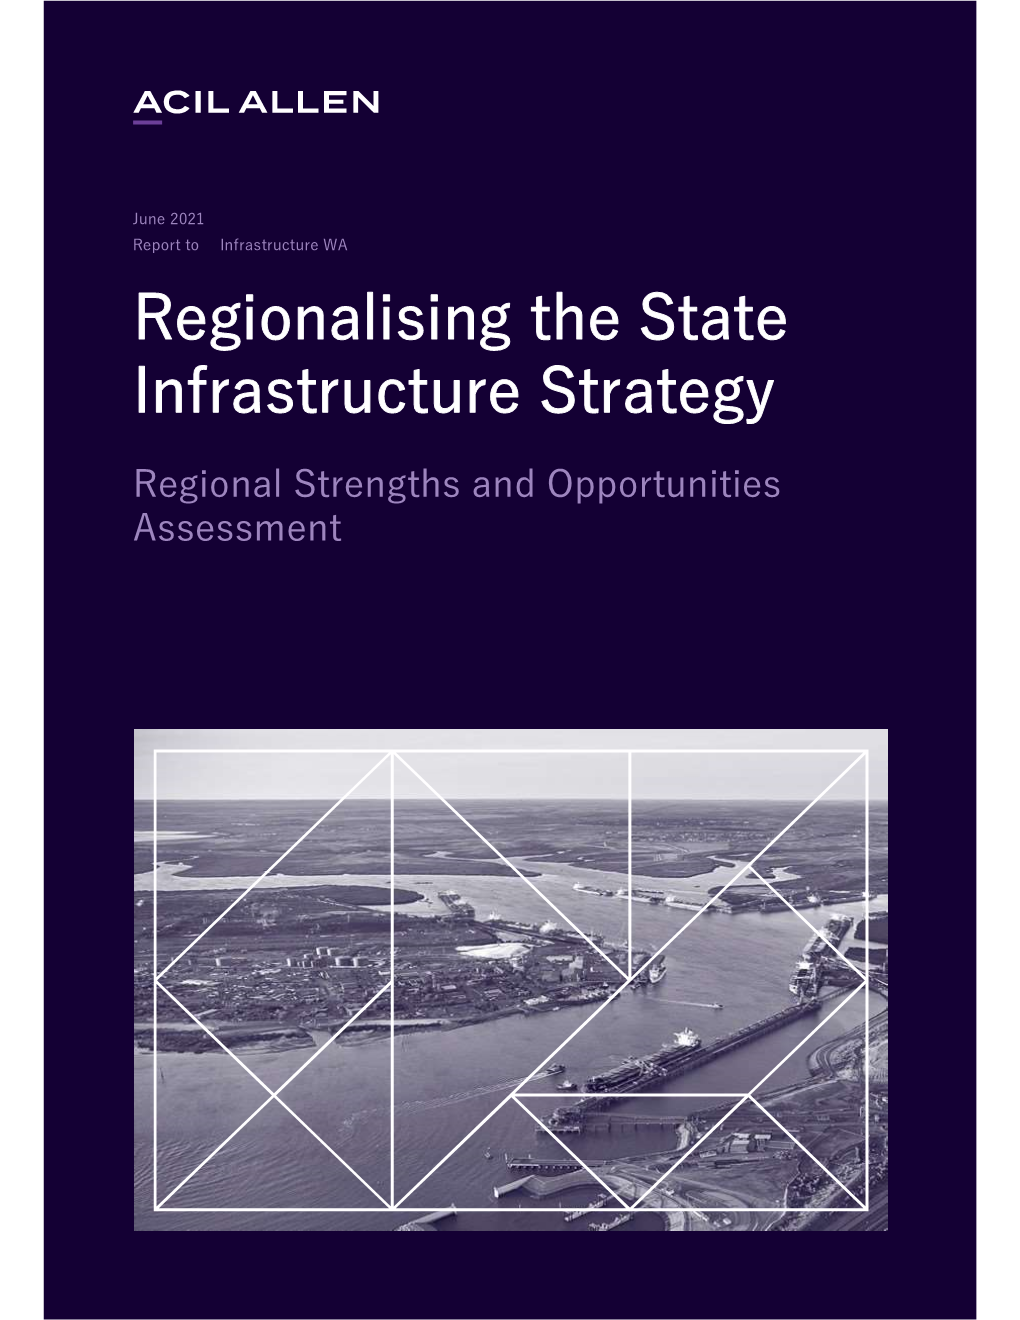 Regionalising the State Infrastructure Strategy